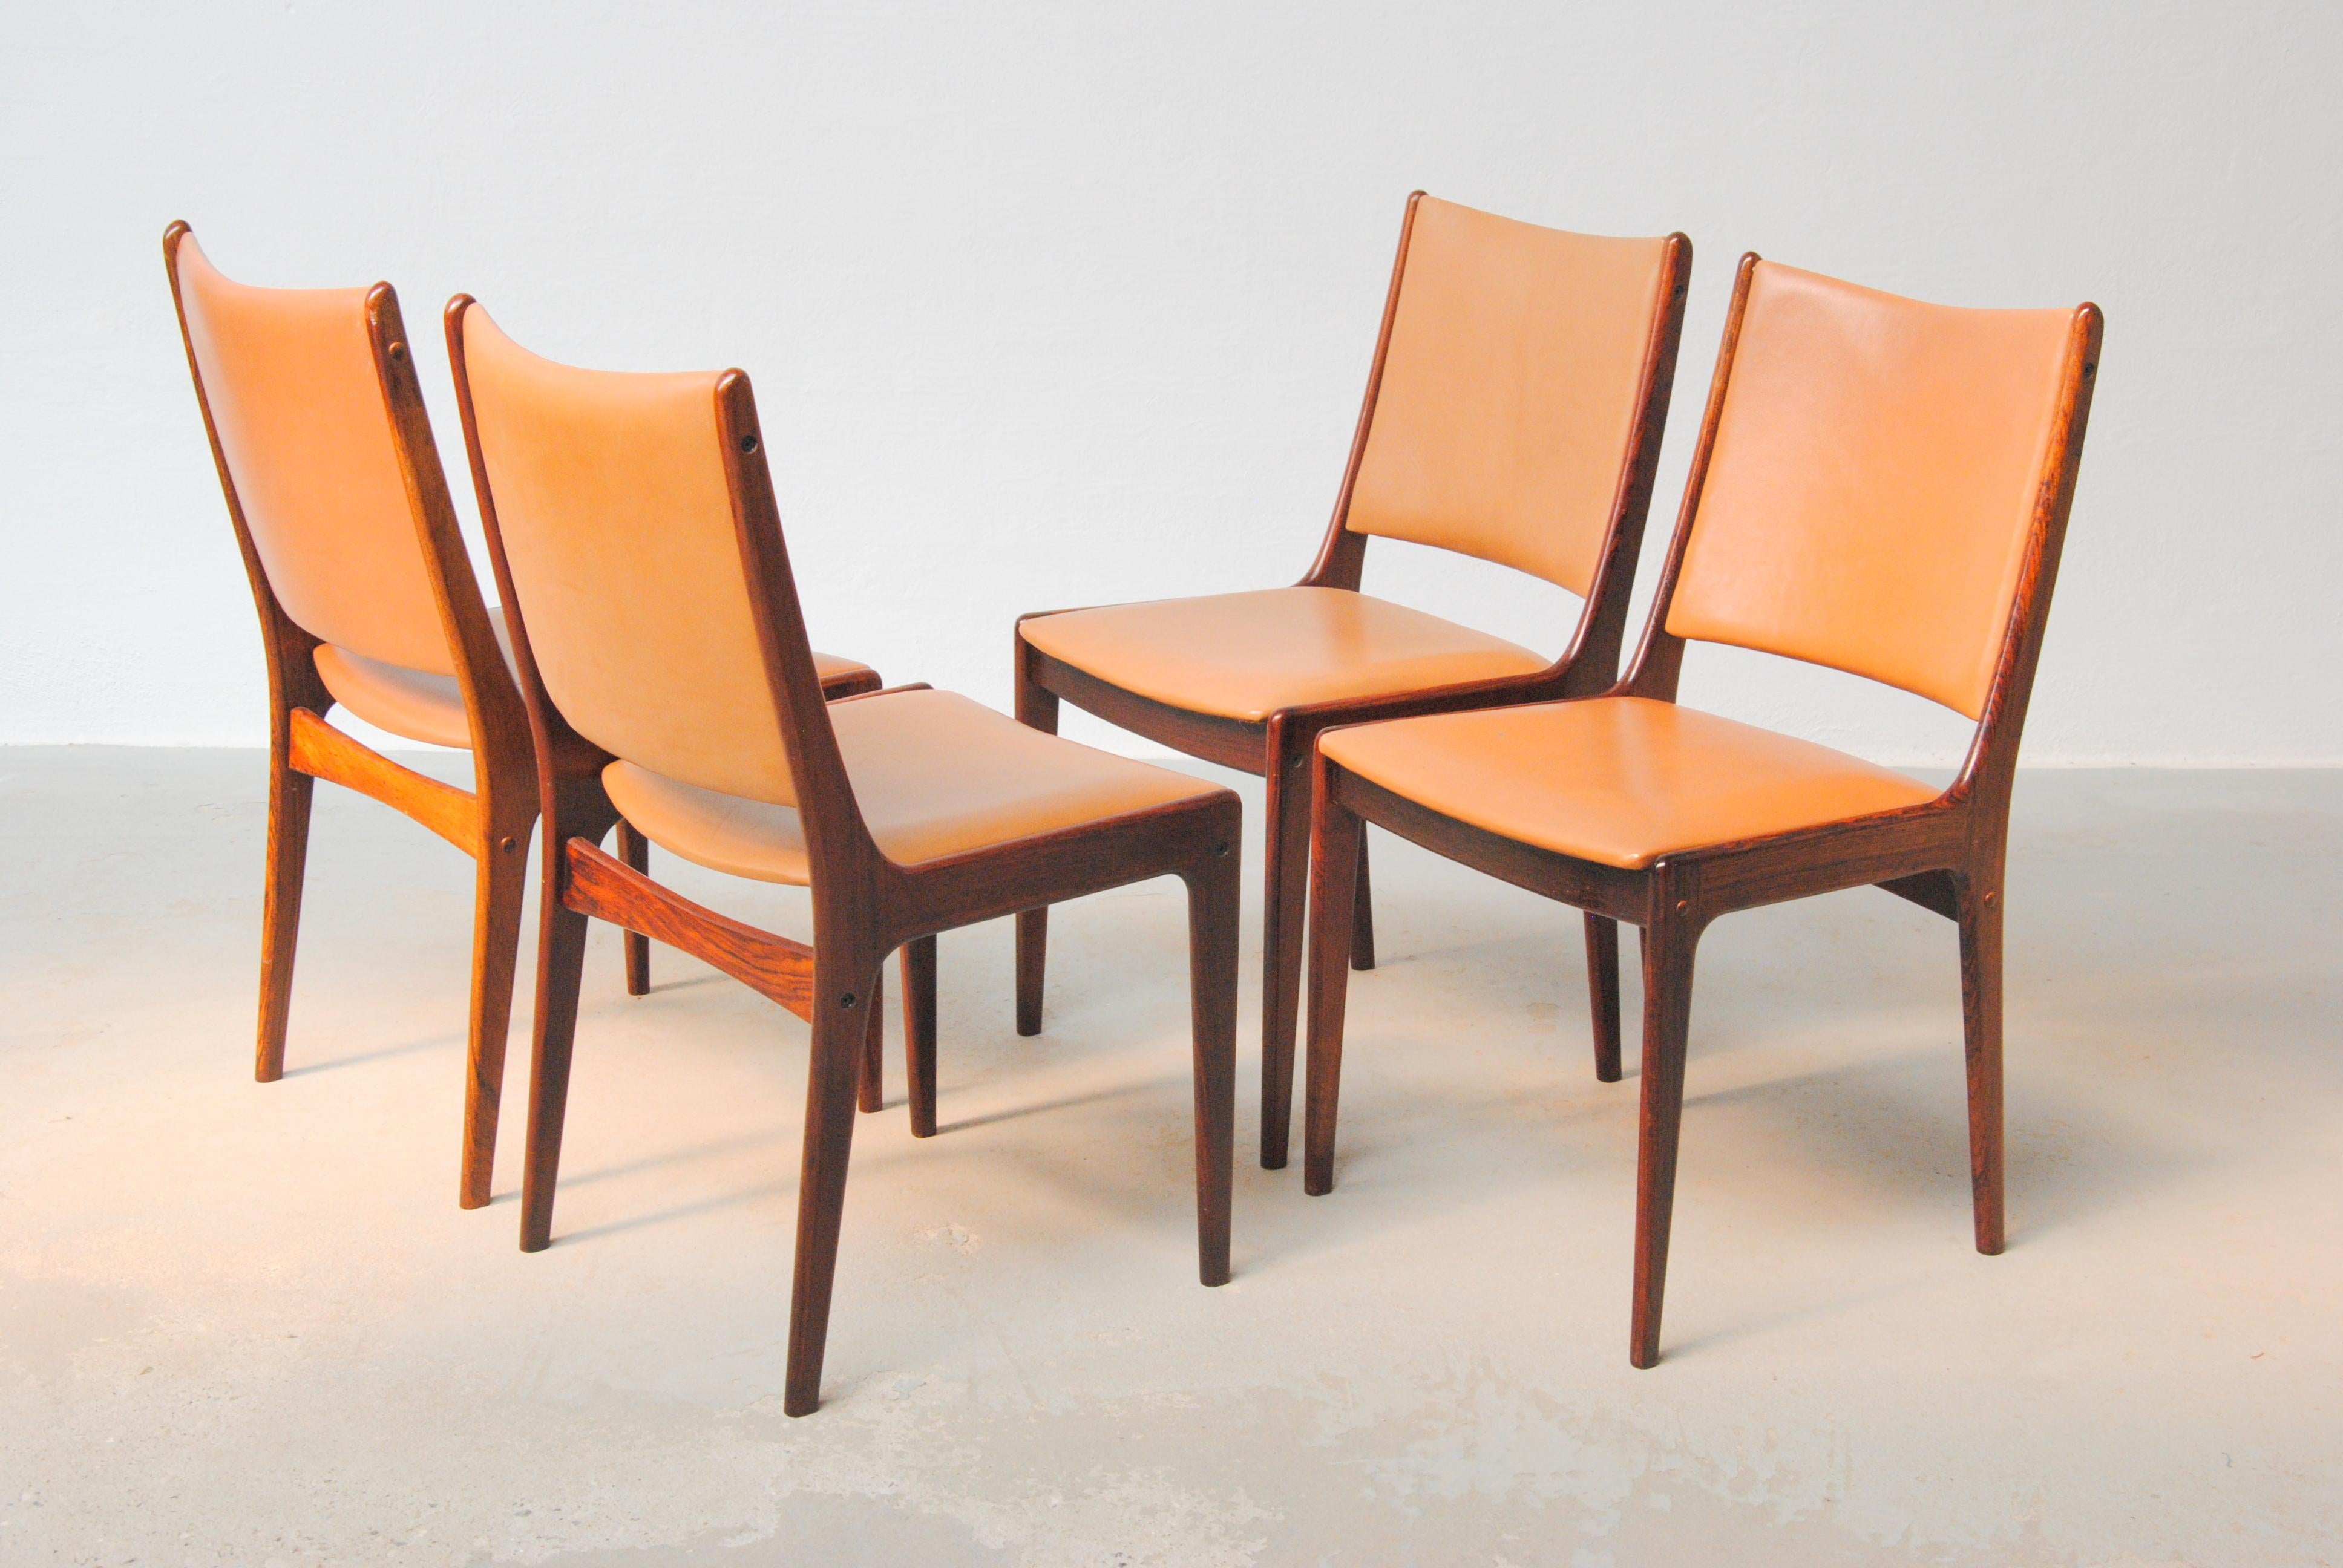 Set of Four fully restored 1960s Johannes Andersen dining chairs in rosewood made by Uldum Møbler, Denmark.

The set of dining chairs feature a clean simple yet elegant design that will fit in well in most houses. 

The chairs have been fully